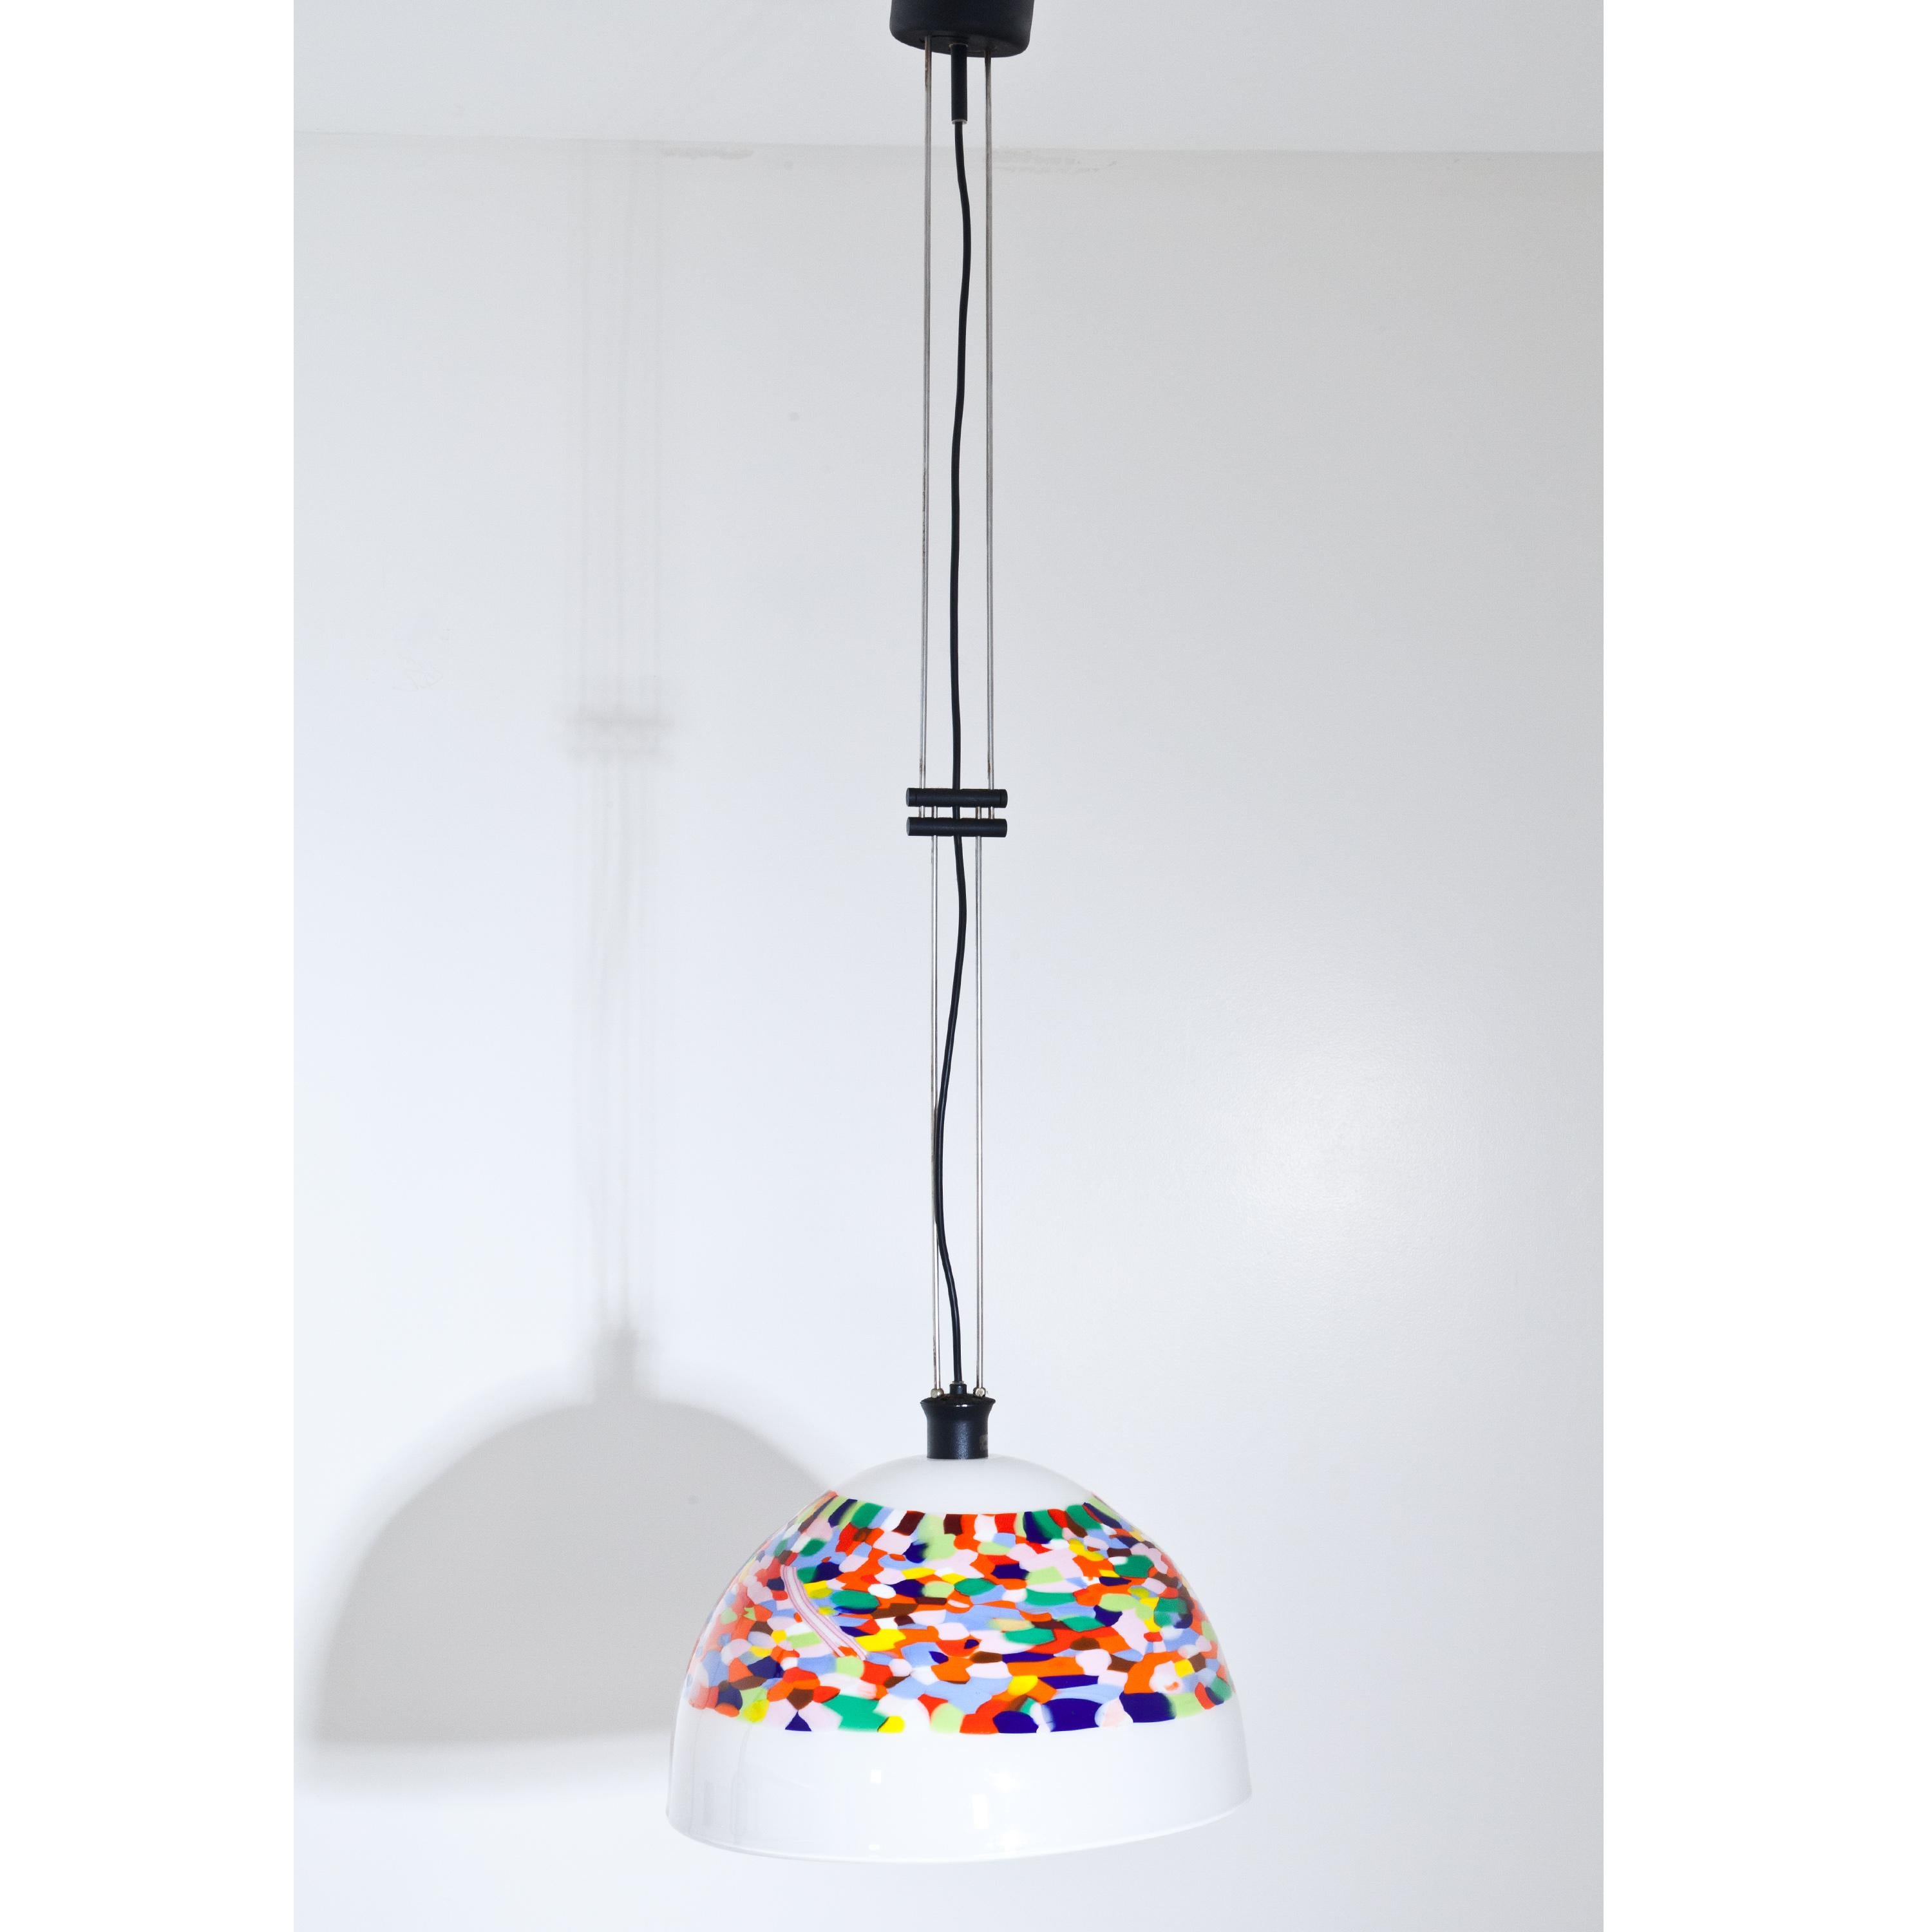 Pendant lamp with round, colored Murrine glass shade (H: 26 x Ø42 cm). The holder can be adjusted in height from 100 cm to 140 cm.
  